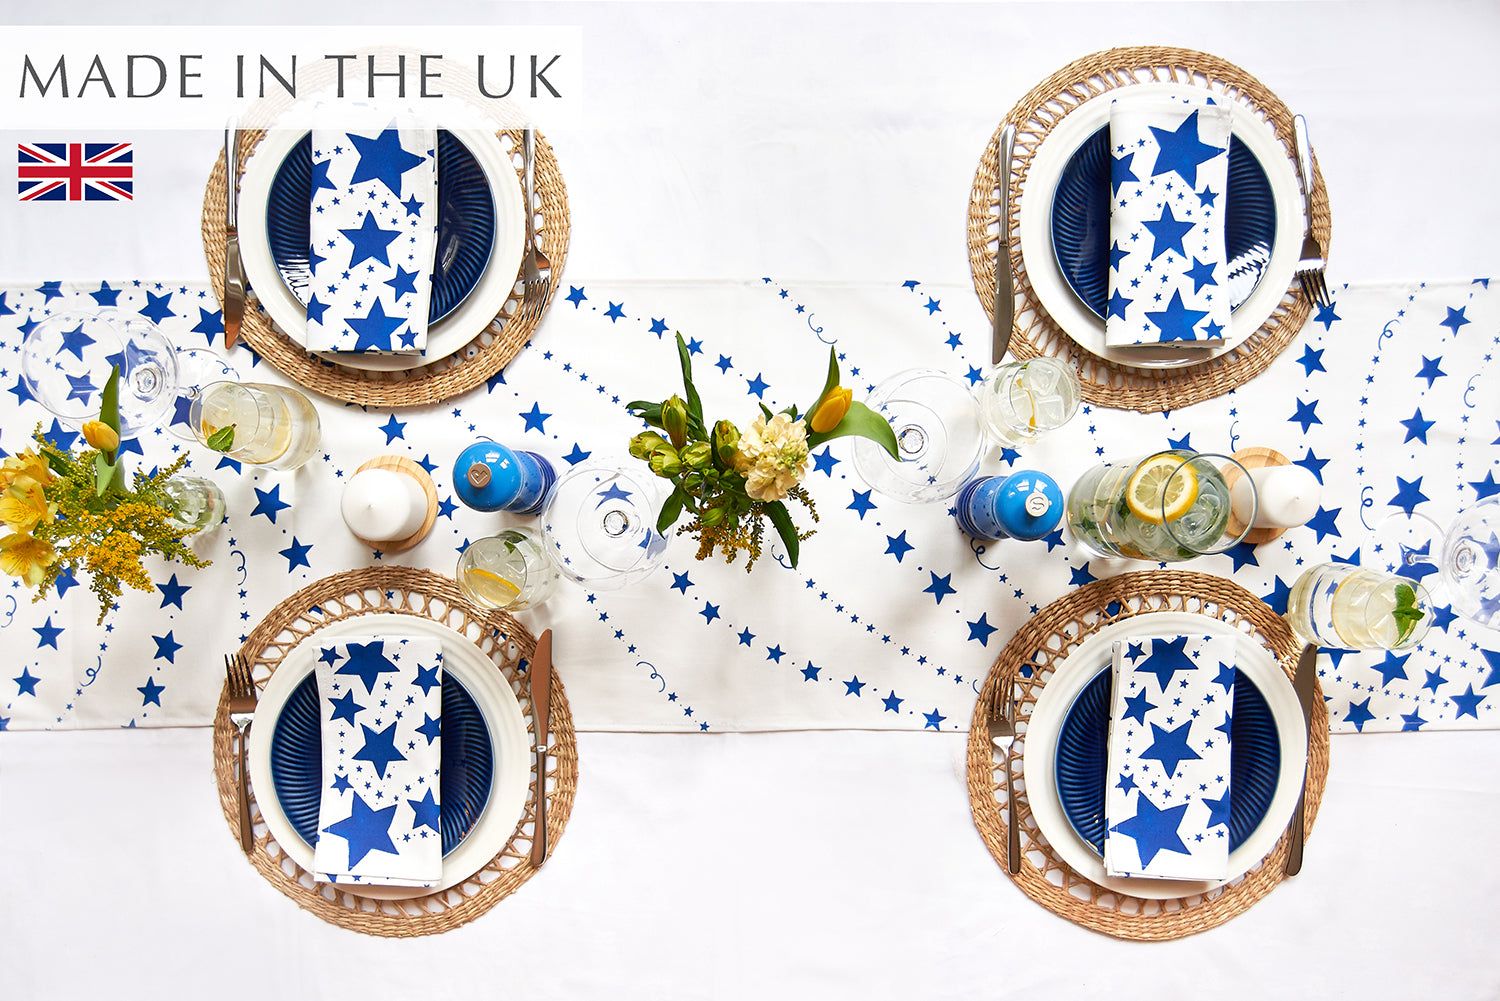 Blue stars table runner on a white cloth with 4 place settings